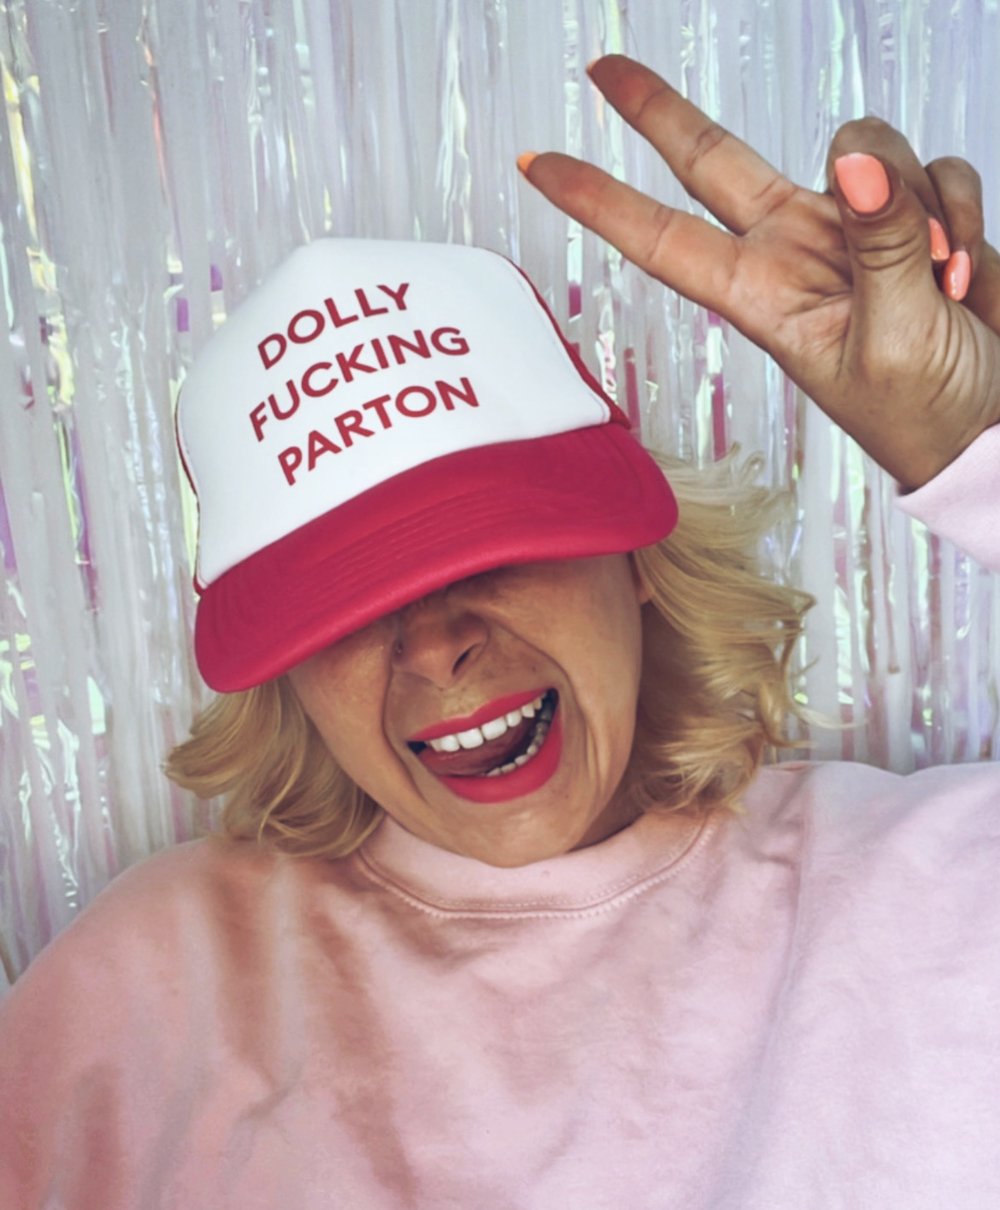 Image of Dolly f**king cap 